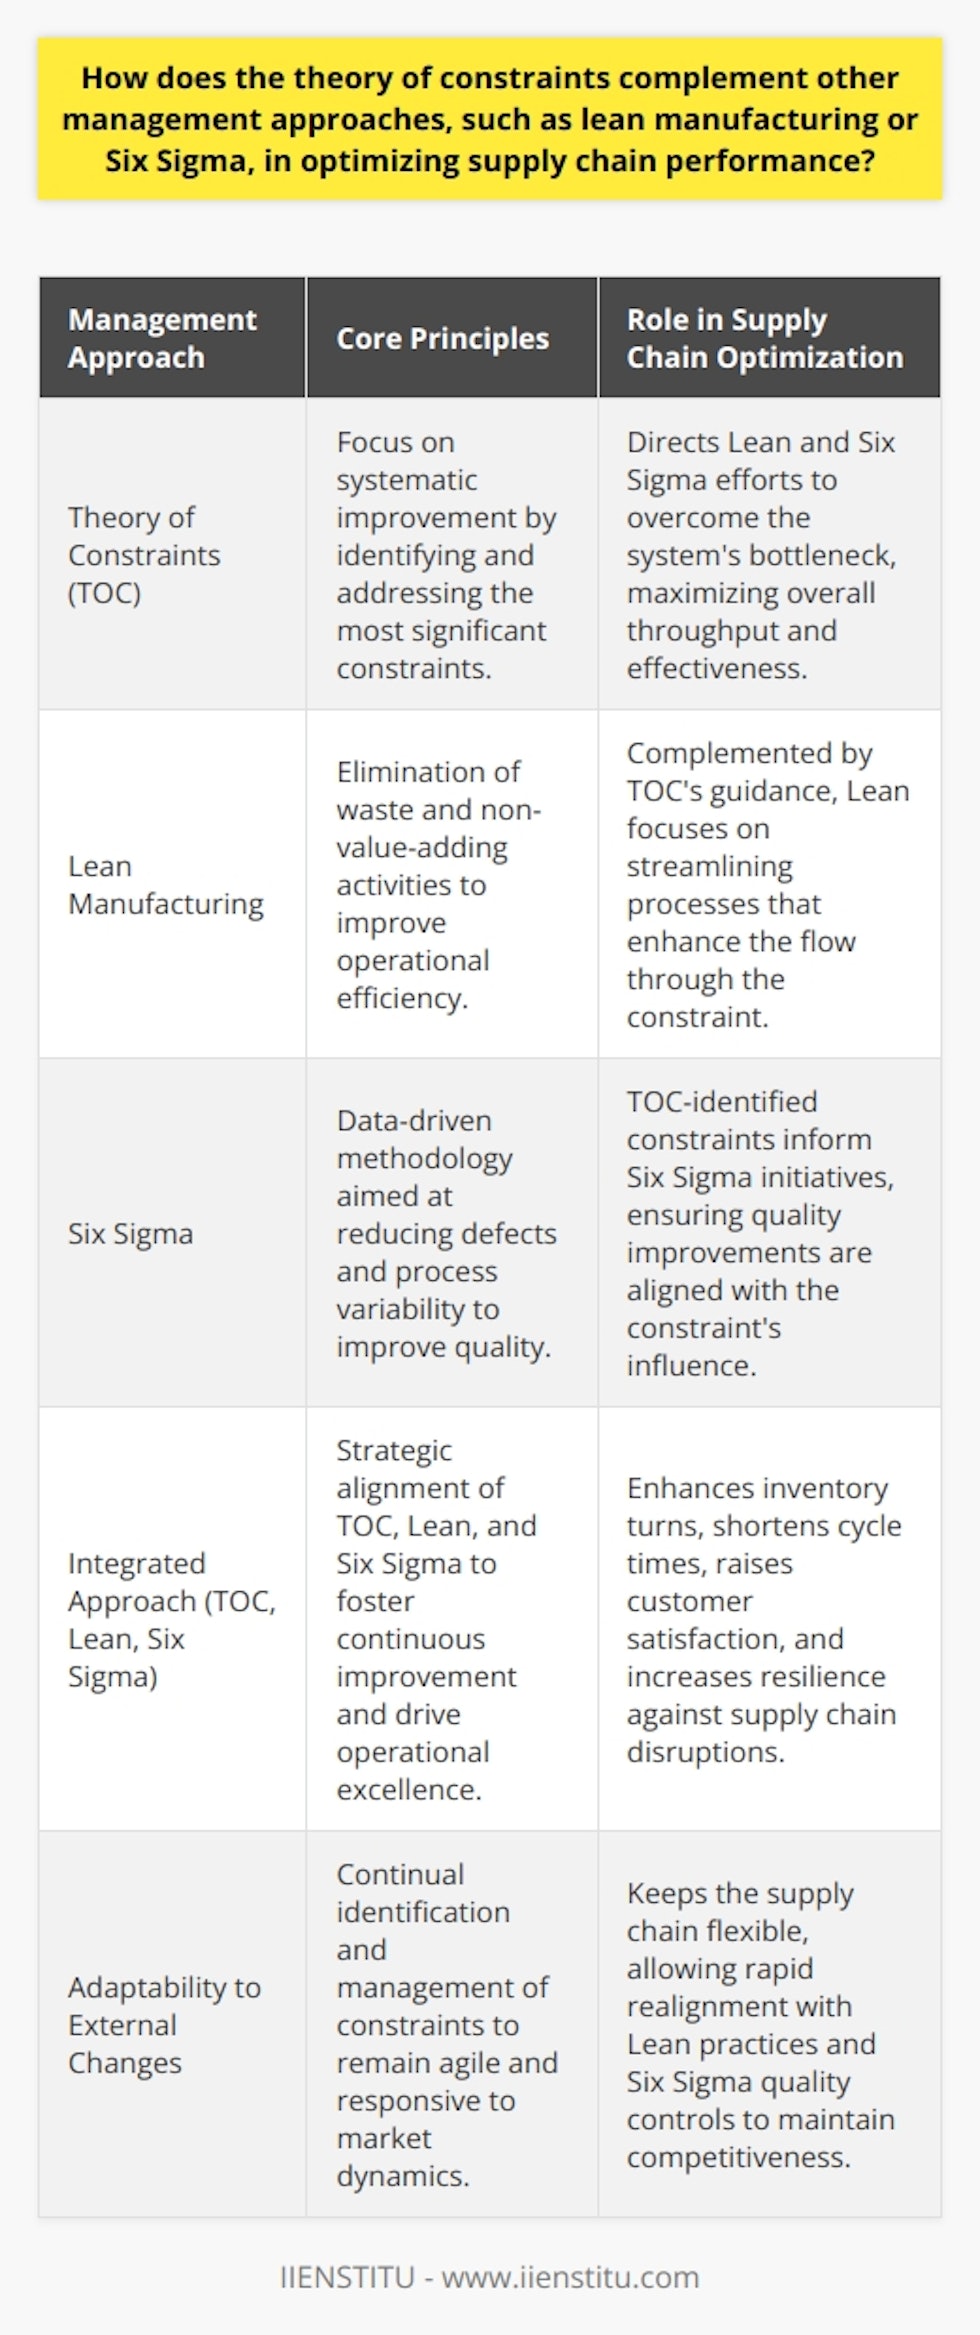 The integration of the Theory of Constraints (TOC) with Lean Manufacturing and Six Sigma engenders a potent blend of operational excellence that can dramatically enhance supply chain performance. This triage of management strategies is a unified force in the quest to achieve peak efficiency and quality standards.TOC, with its laser-sharp focus on the most significant impediment to performance, ensures that Lean and Six Sigma initiatives are aligned with the overall system improvement rather than sub-optimizing individual components. TOC compels organizations to discern the pivotal change that will yield disproportionate benefits. When constraints are identified accurately and addressed, resources can be allocated more effectively, and subsequent process improvements can generate more substantial results.The TOC's inherent principle, centered around exploiting and subordinating to the system's constraint, naturally dovetails with Lean Manufacturing's philosophy of eliminating non-value-adding activities. Lean, with its roots in operational efficiency, eliminates waste through tools like value stream mapping and 5S, which can now be more effectively utilized when guided by the insights gained from TOC analysis. This can help to avoid the common pitfall of improving areas that will not significantly enhance the throughput of the entire supply chain.Six Sigma, on the other hand, employs a data-driven approach to eliminate defects and reduce process variability. When combined with TOC, Six Sigma's rigorous methodology can be directed toward areas of the supply chain that represent the constraint or are directly affected by it. This prioritization ensures that Six Sigma projects deliver results that resonate across the supply chain, magnifying the impact of these quality enhancements on overall performance and reliability.The holistic application of TOC alongside Lean and Six Sigma manifests in improved inventory turns, reduced cycle times, and higher customer satisfaction. This amalgamation also acts to create a resilient supply chain. Since TOC facilitates the quick identification of system constraints, Lean Manufacturing enables an adaptive and efficient flow of materials, and Six Sigma ensures quality and precision, the supply chain becomes more robust against disruptions.Moreover, the theory of constraints provides a dynamic framework for addressing changes in the external environment, such as shifts in customer demand, market fluctuations, or supply disruptions. By continually identifying and managing constraints, TOC keeps the supply chain agile and allows for rapid realignment with Lean practices and Six Sigma quality controls.In essence, the Theory of Constraints, Lean Manufacturing, and Six Sigma form a strategic alliance that maximizes the performance of the supply chain. When orchestrated effectively, these methodologies support a culture of continuous improvement, where every constraint presents a new opportunity, waste is seen as the enemy of customer value, and quality is the benchmark of operational success. This integrated approach empowers organizations to maintain their competitive stature by achieving operational excellence and delivering uncompromised value to the customer.